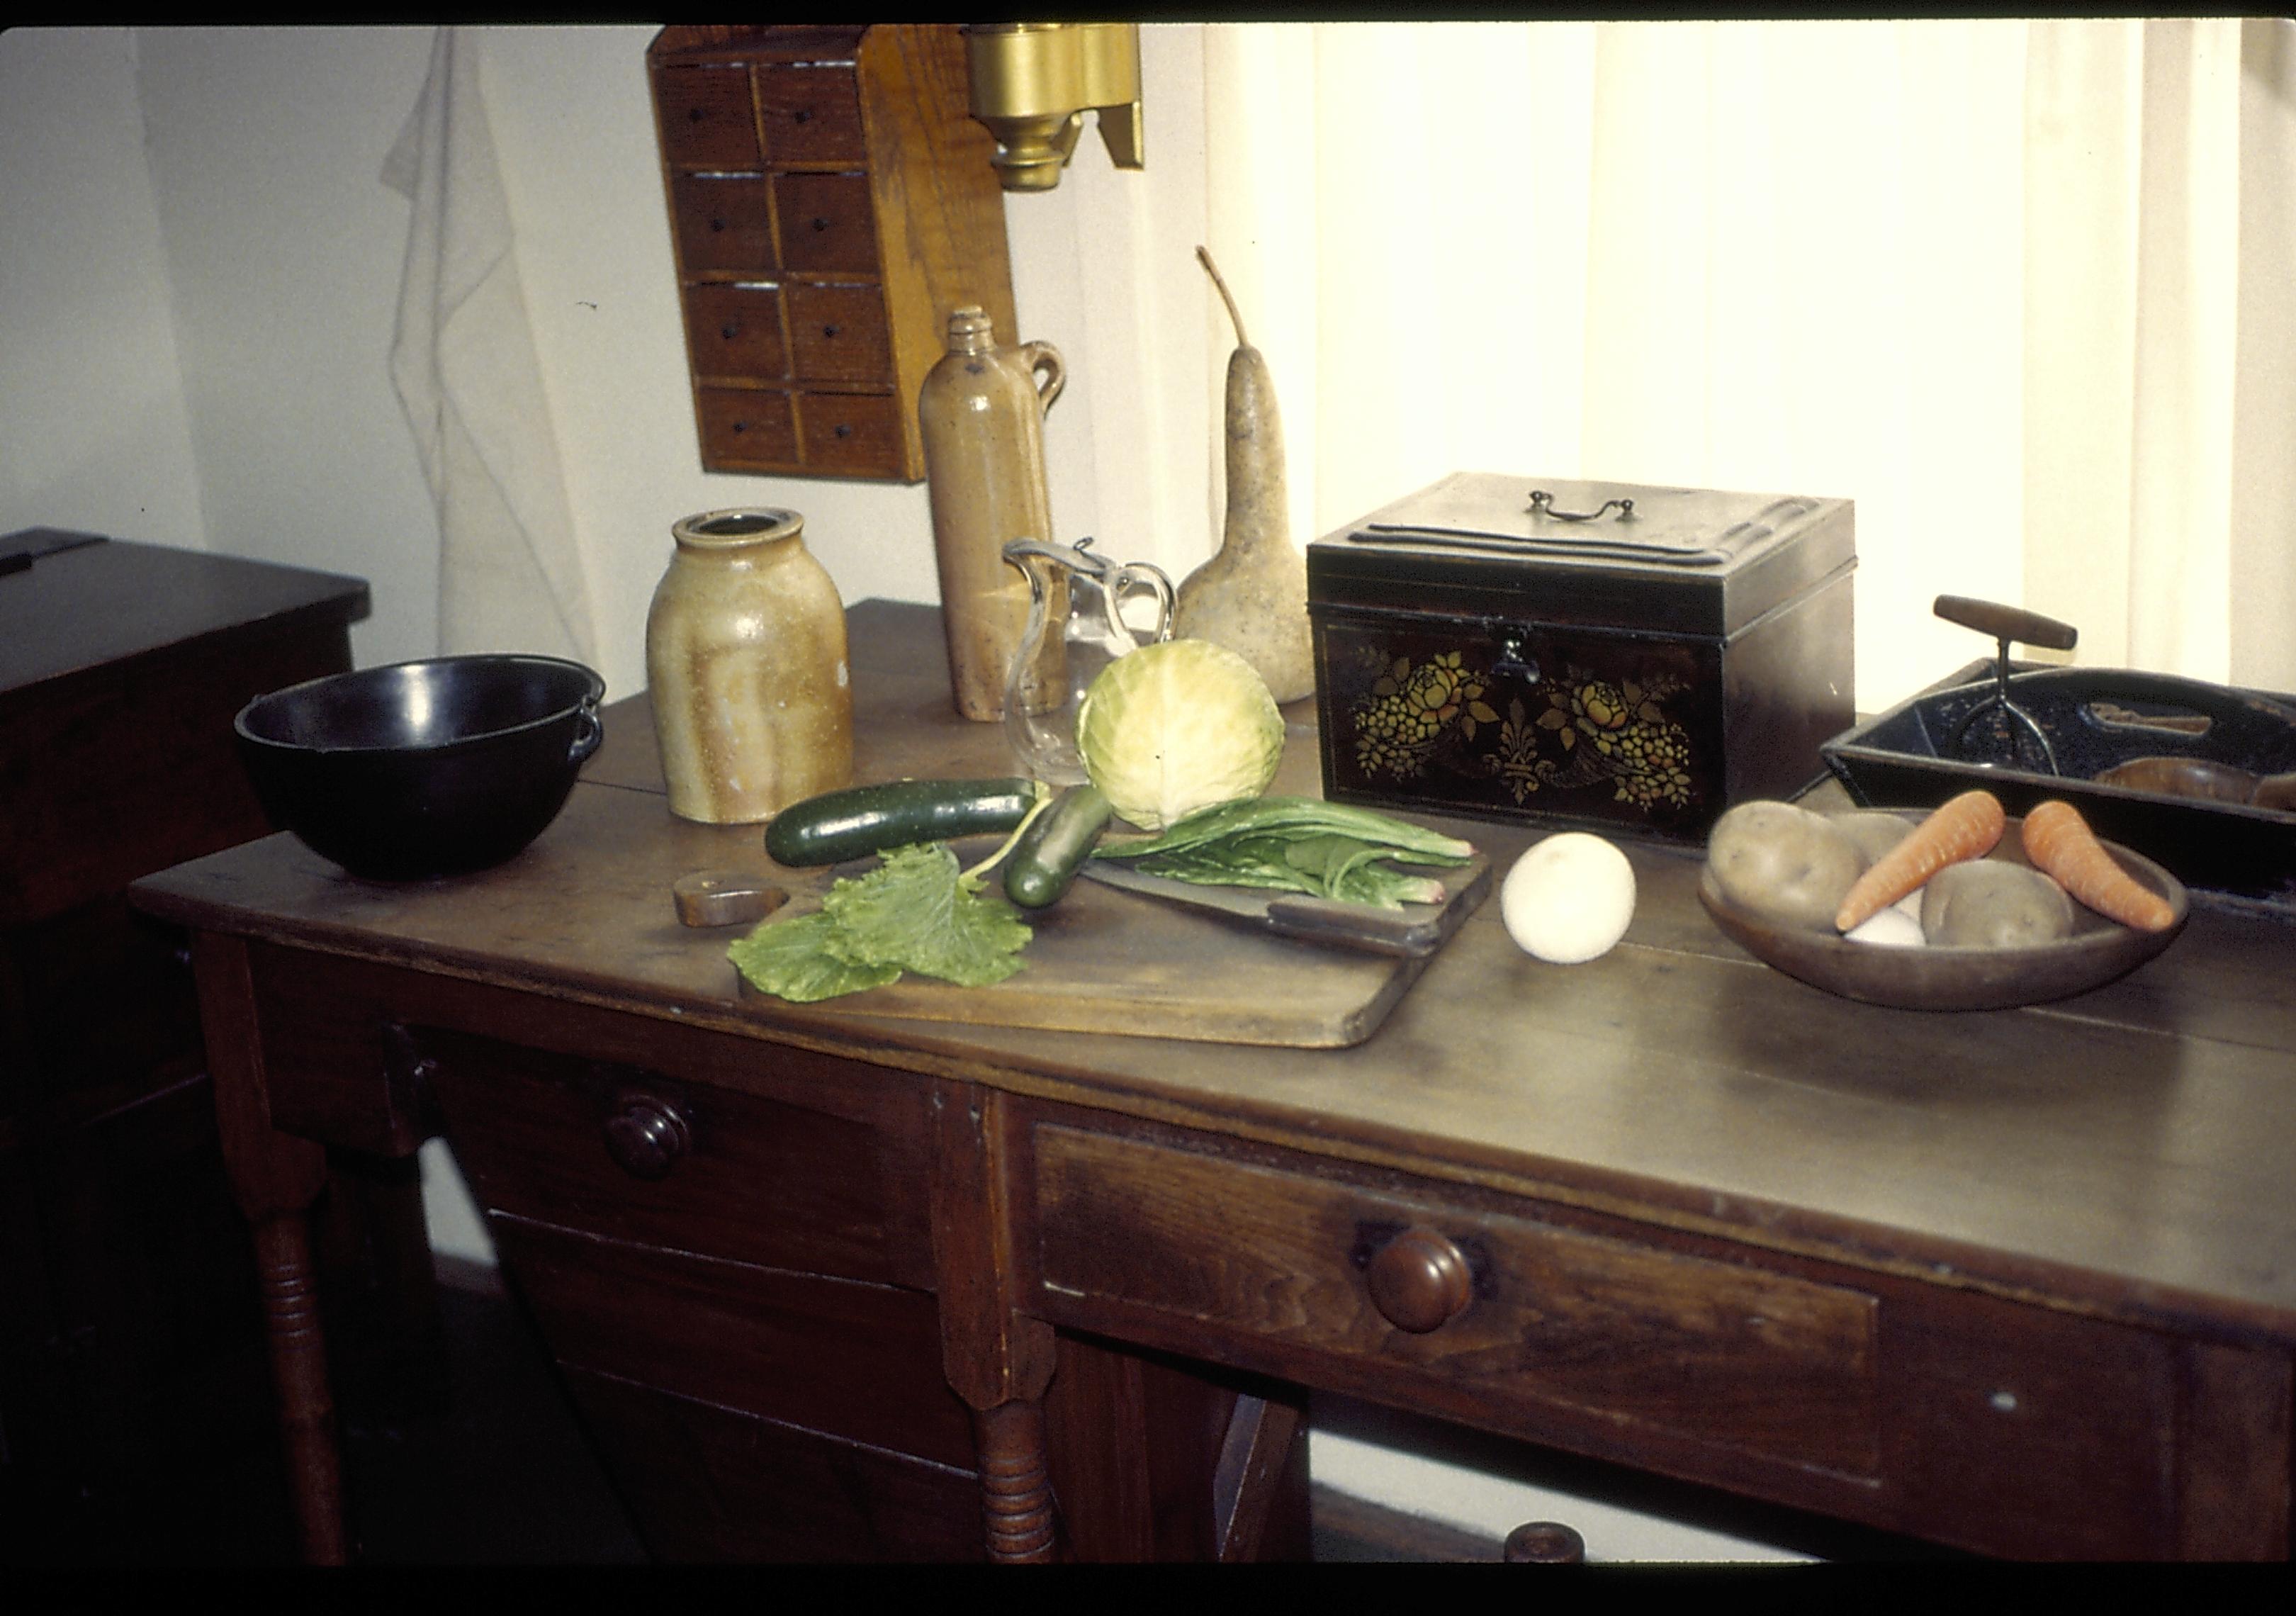 Vegetables on cutting board on table in kitchen. Lincoln Home NHS- Christmas in Lincoln Home 1997, HS-20 Film Roll #17 Christmas, decorations